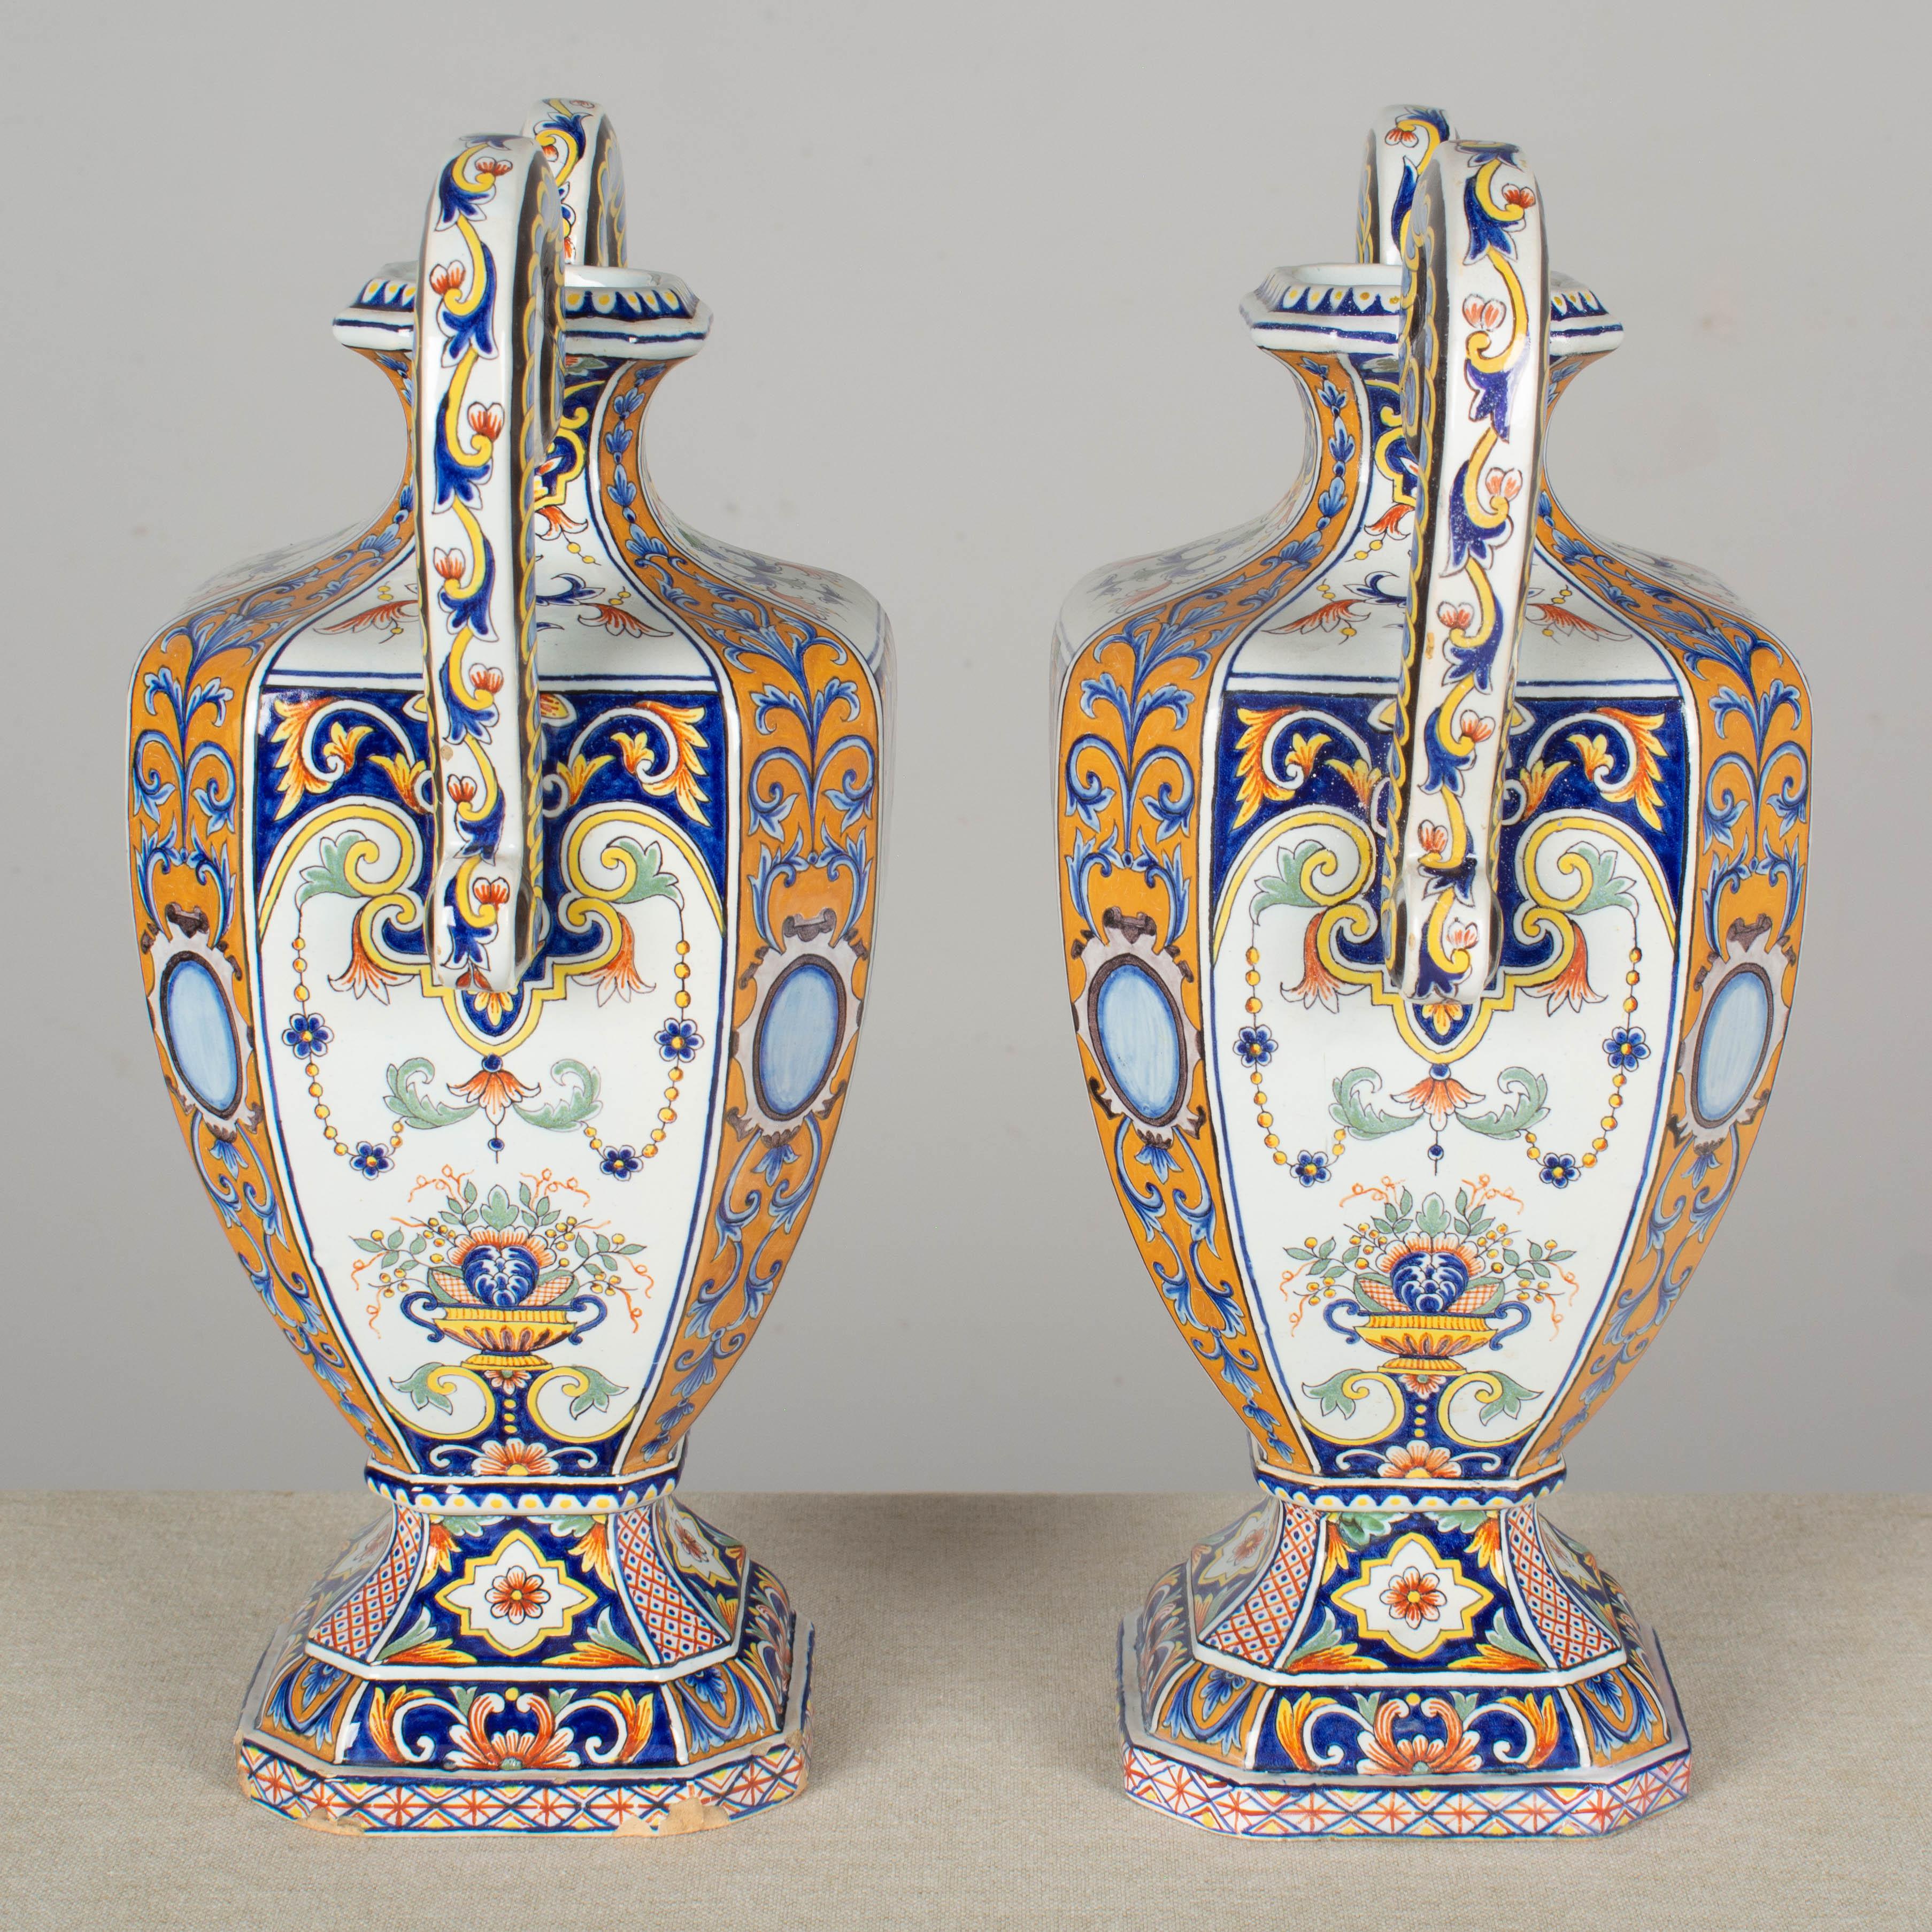 19th Century French Desvres Faience Urn Form Vases, a Pair In Good Condition For Sale In Winter Park, FL